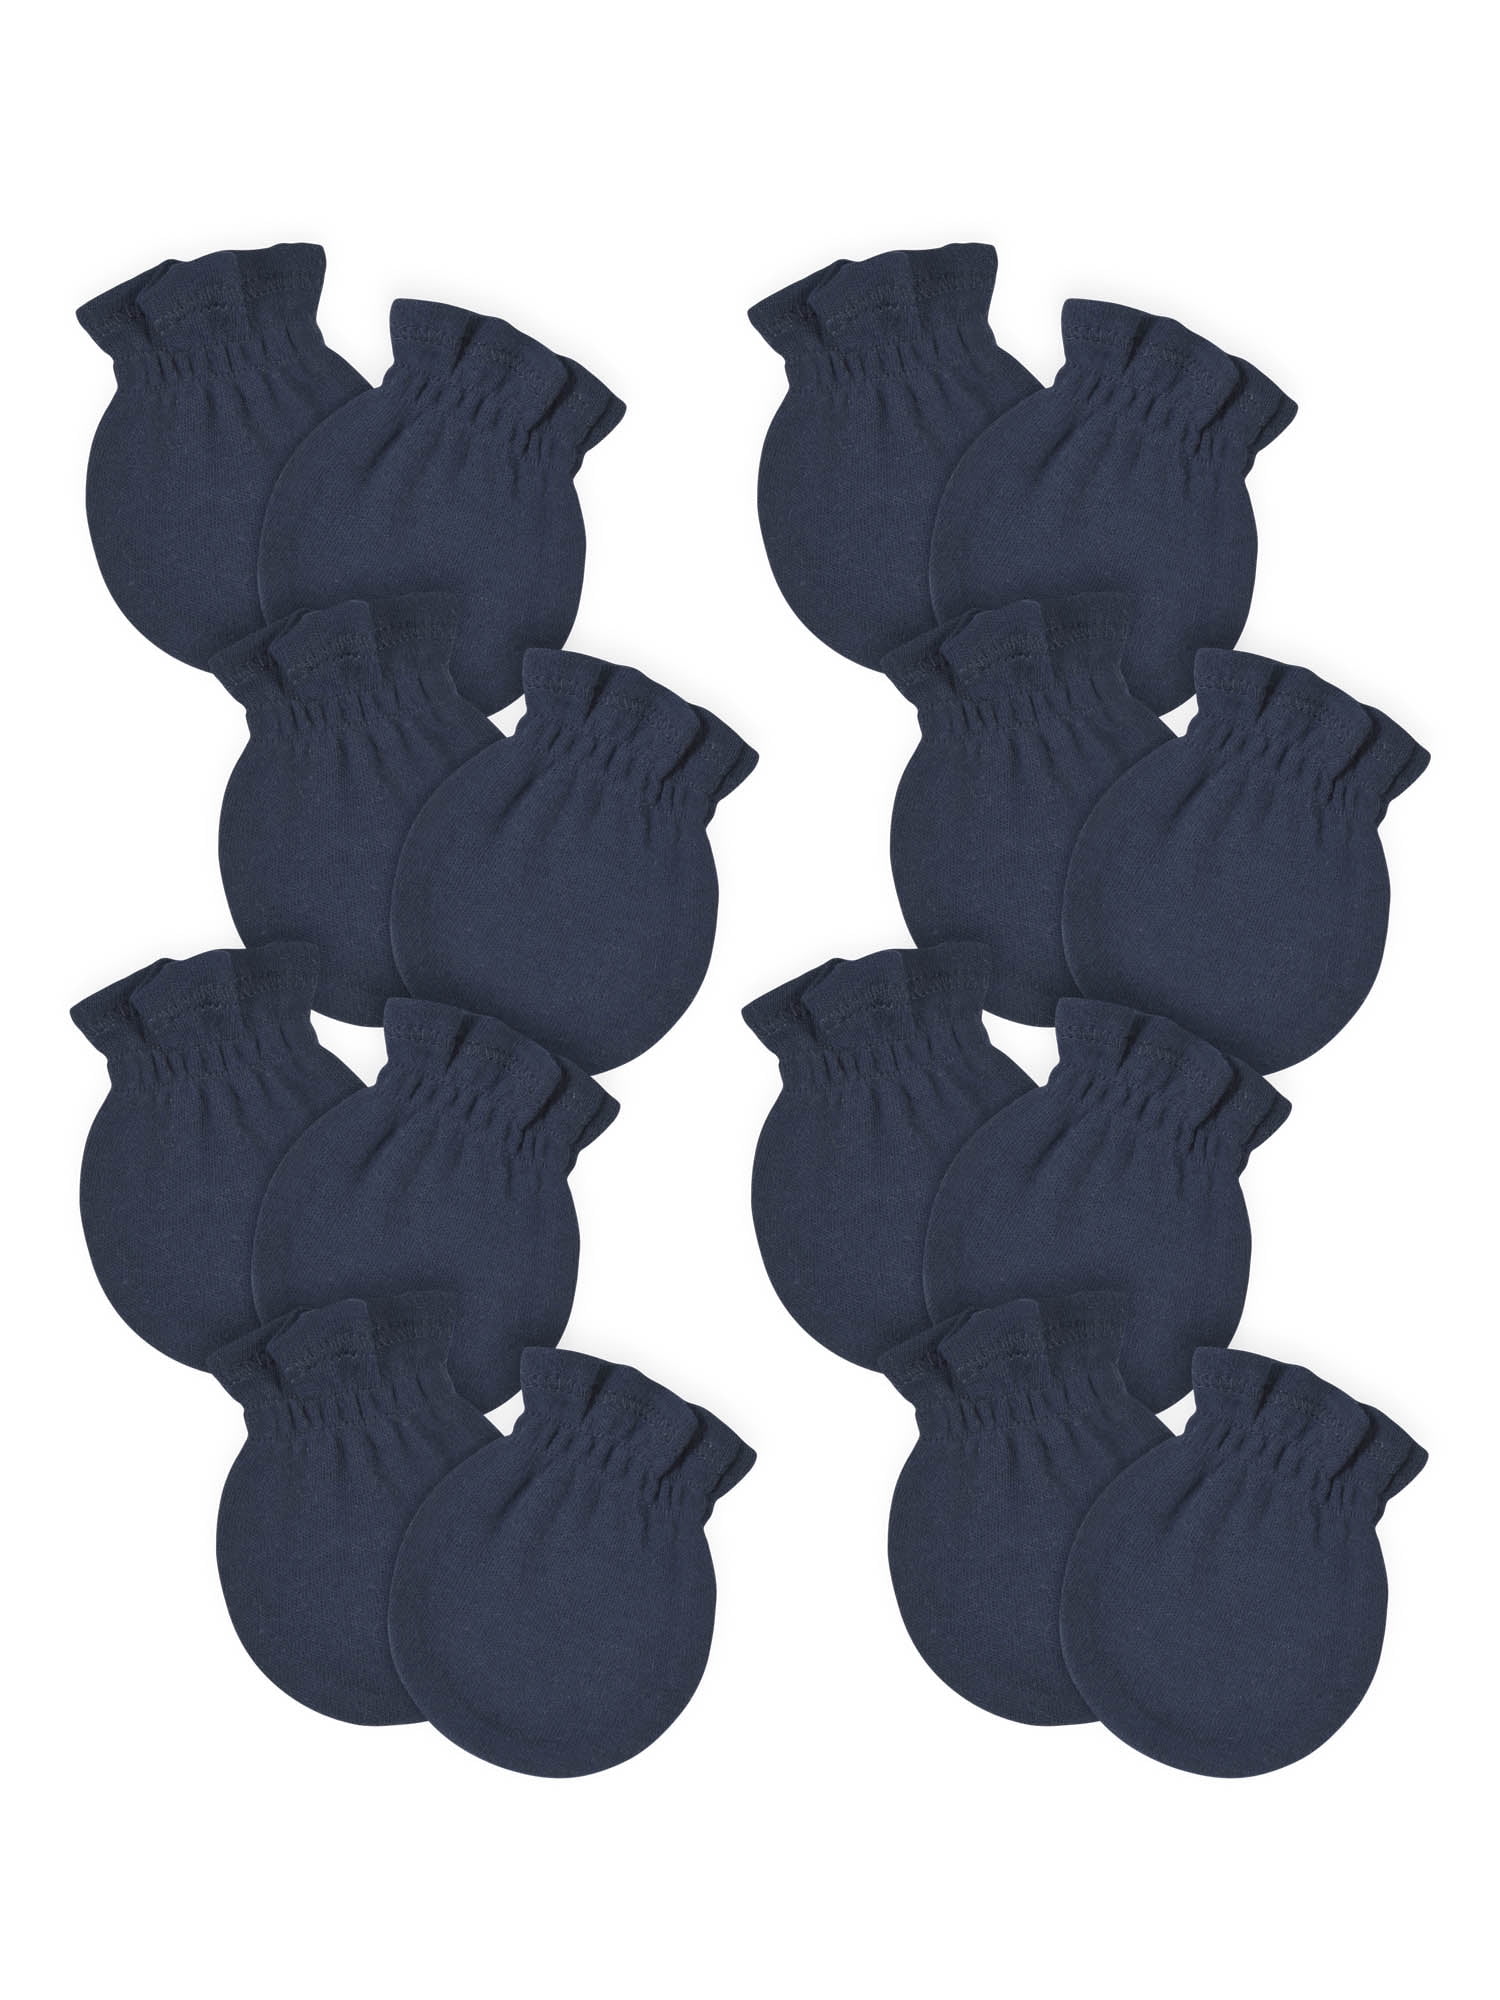 Premature Low Birth Weight Baby Boys Anti Scratch Mittens Blue Pack of 2 